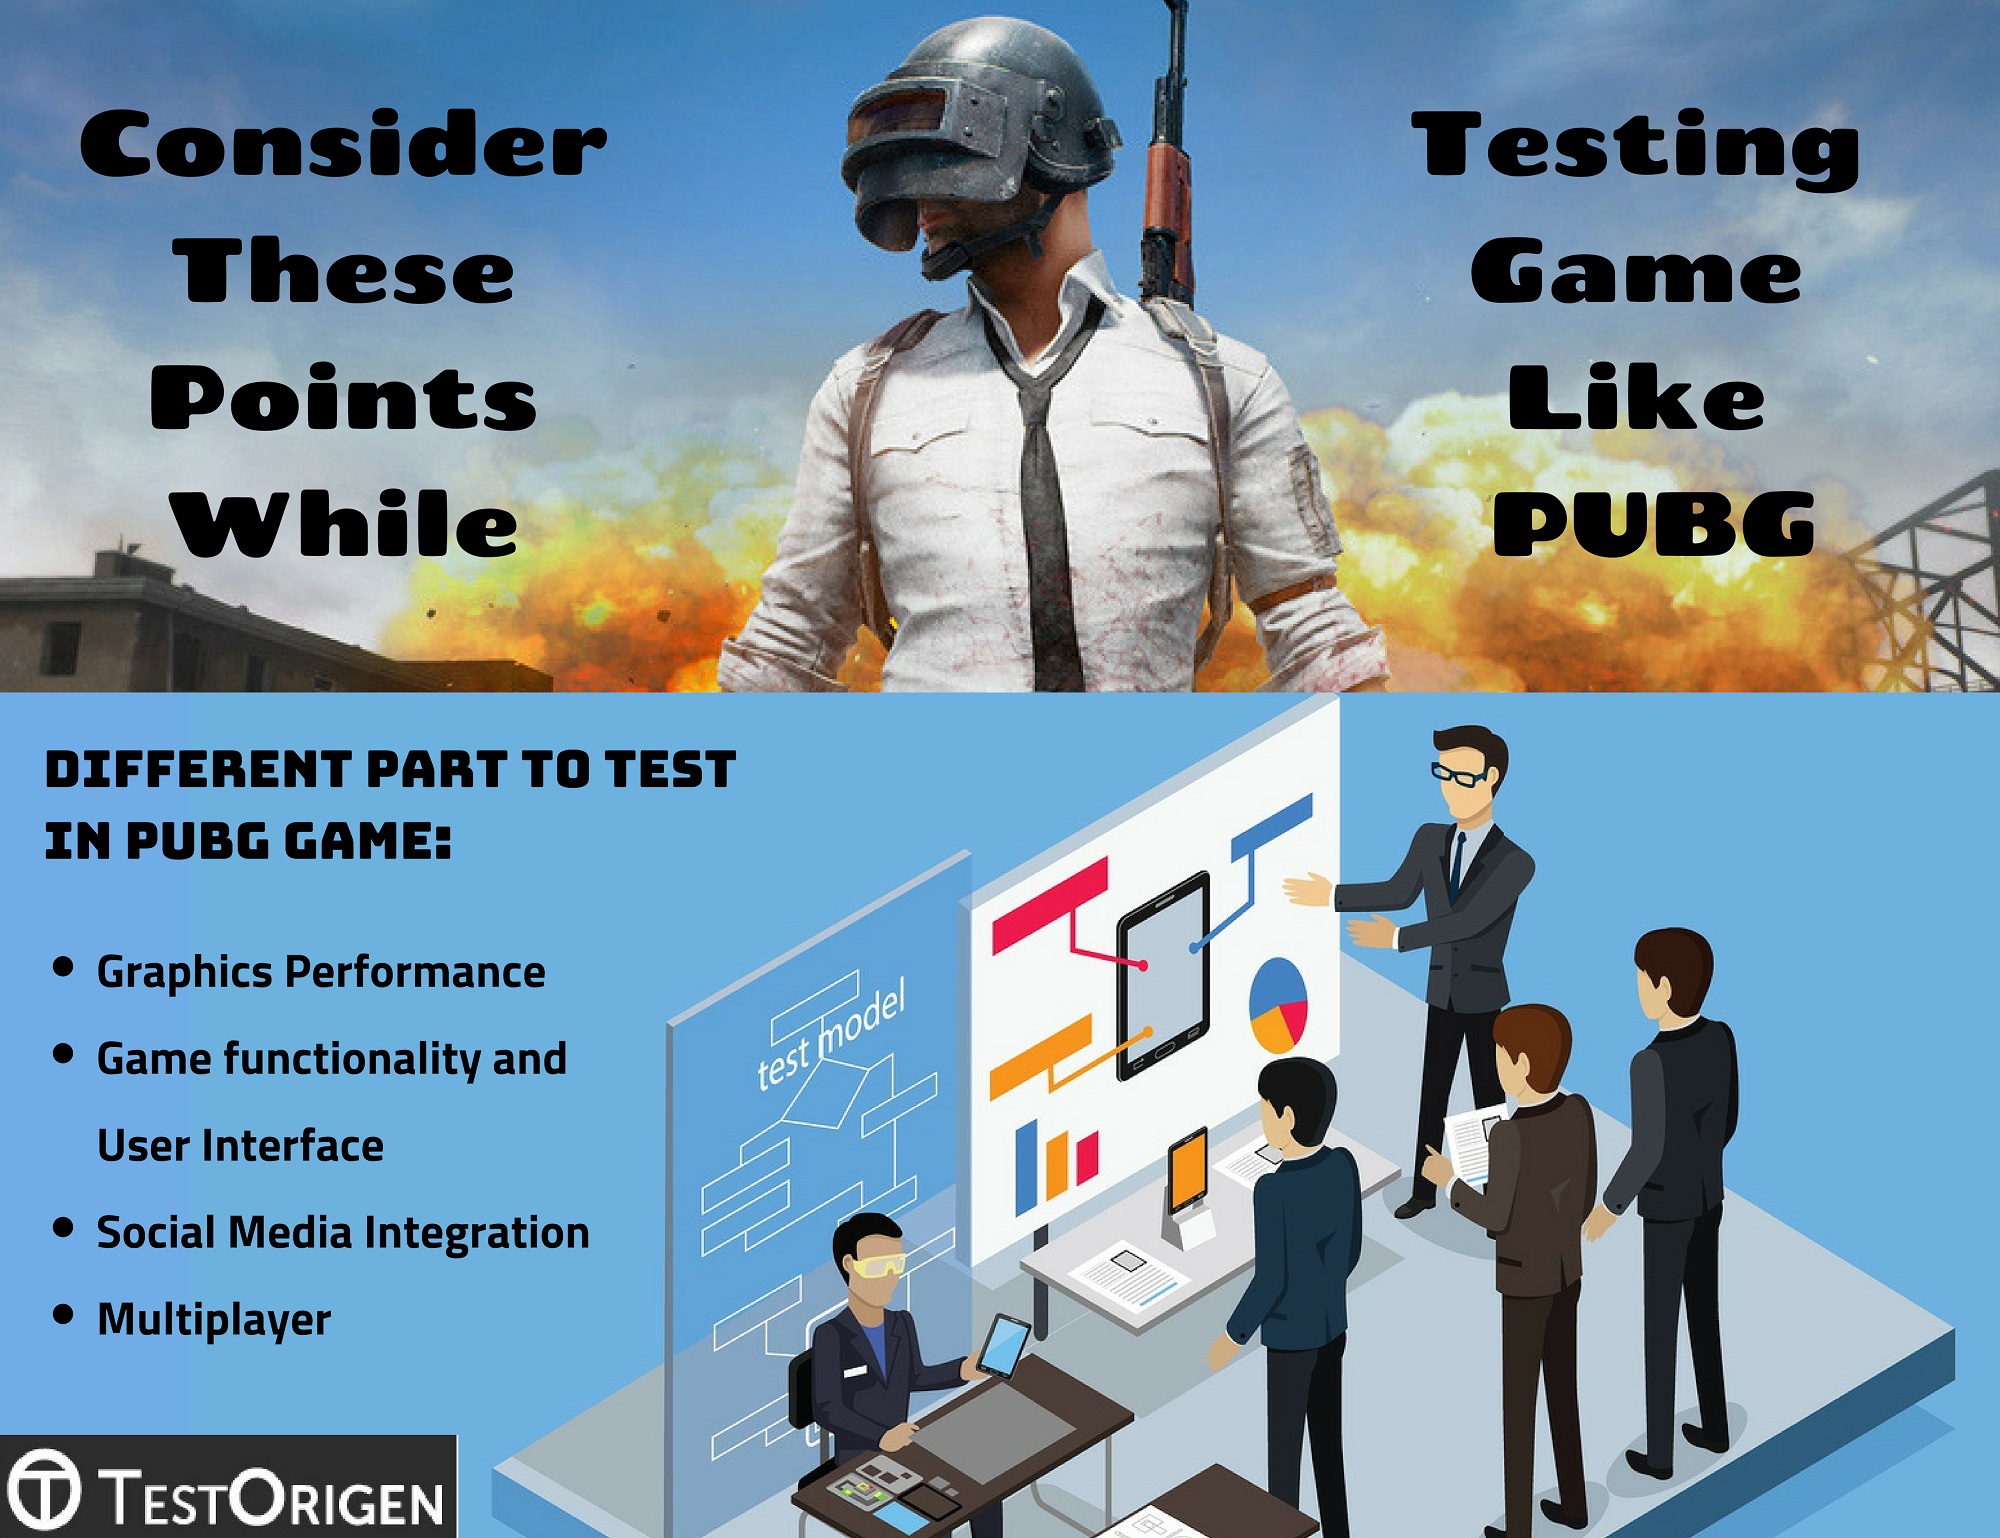 Consider These Points While Testing Game Like PUBG